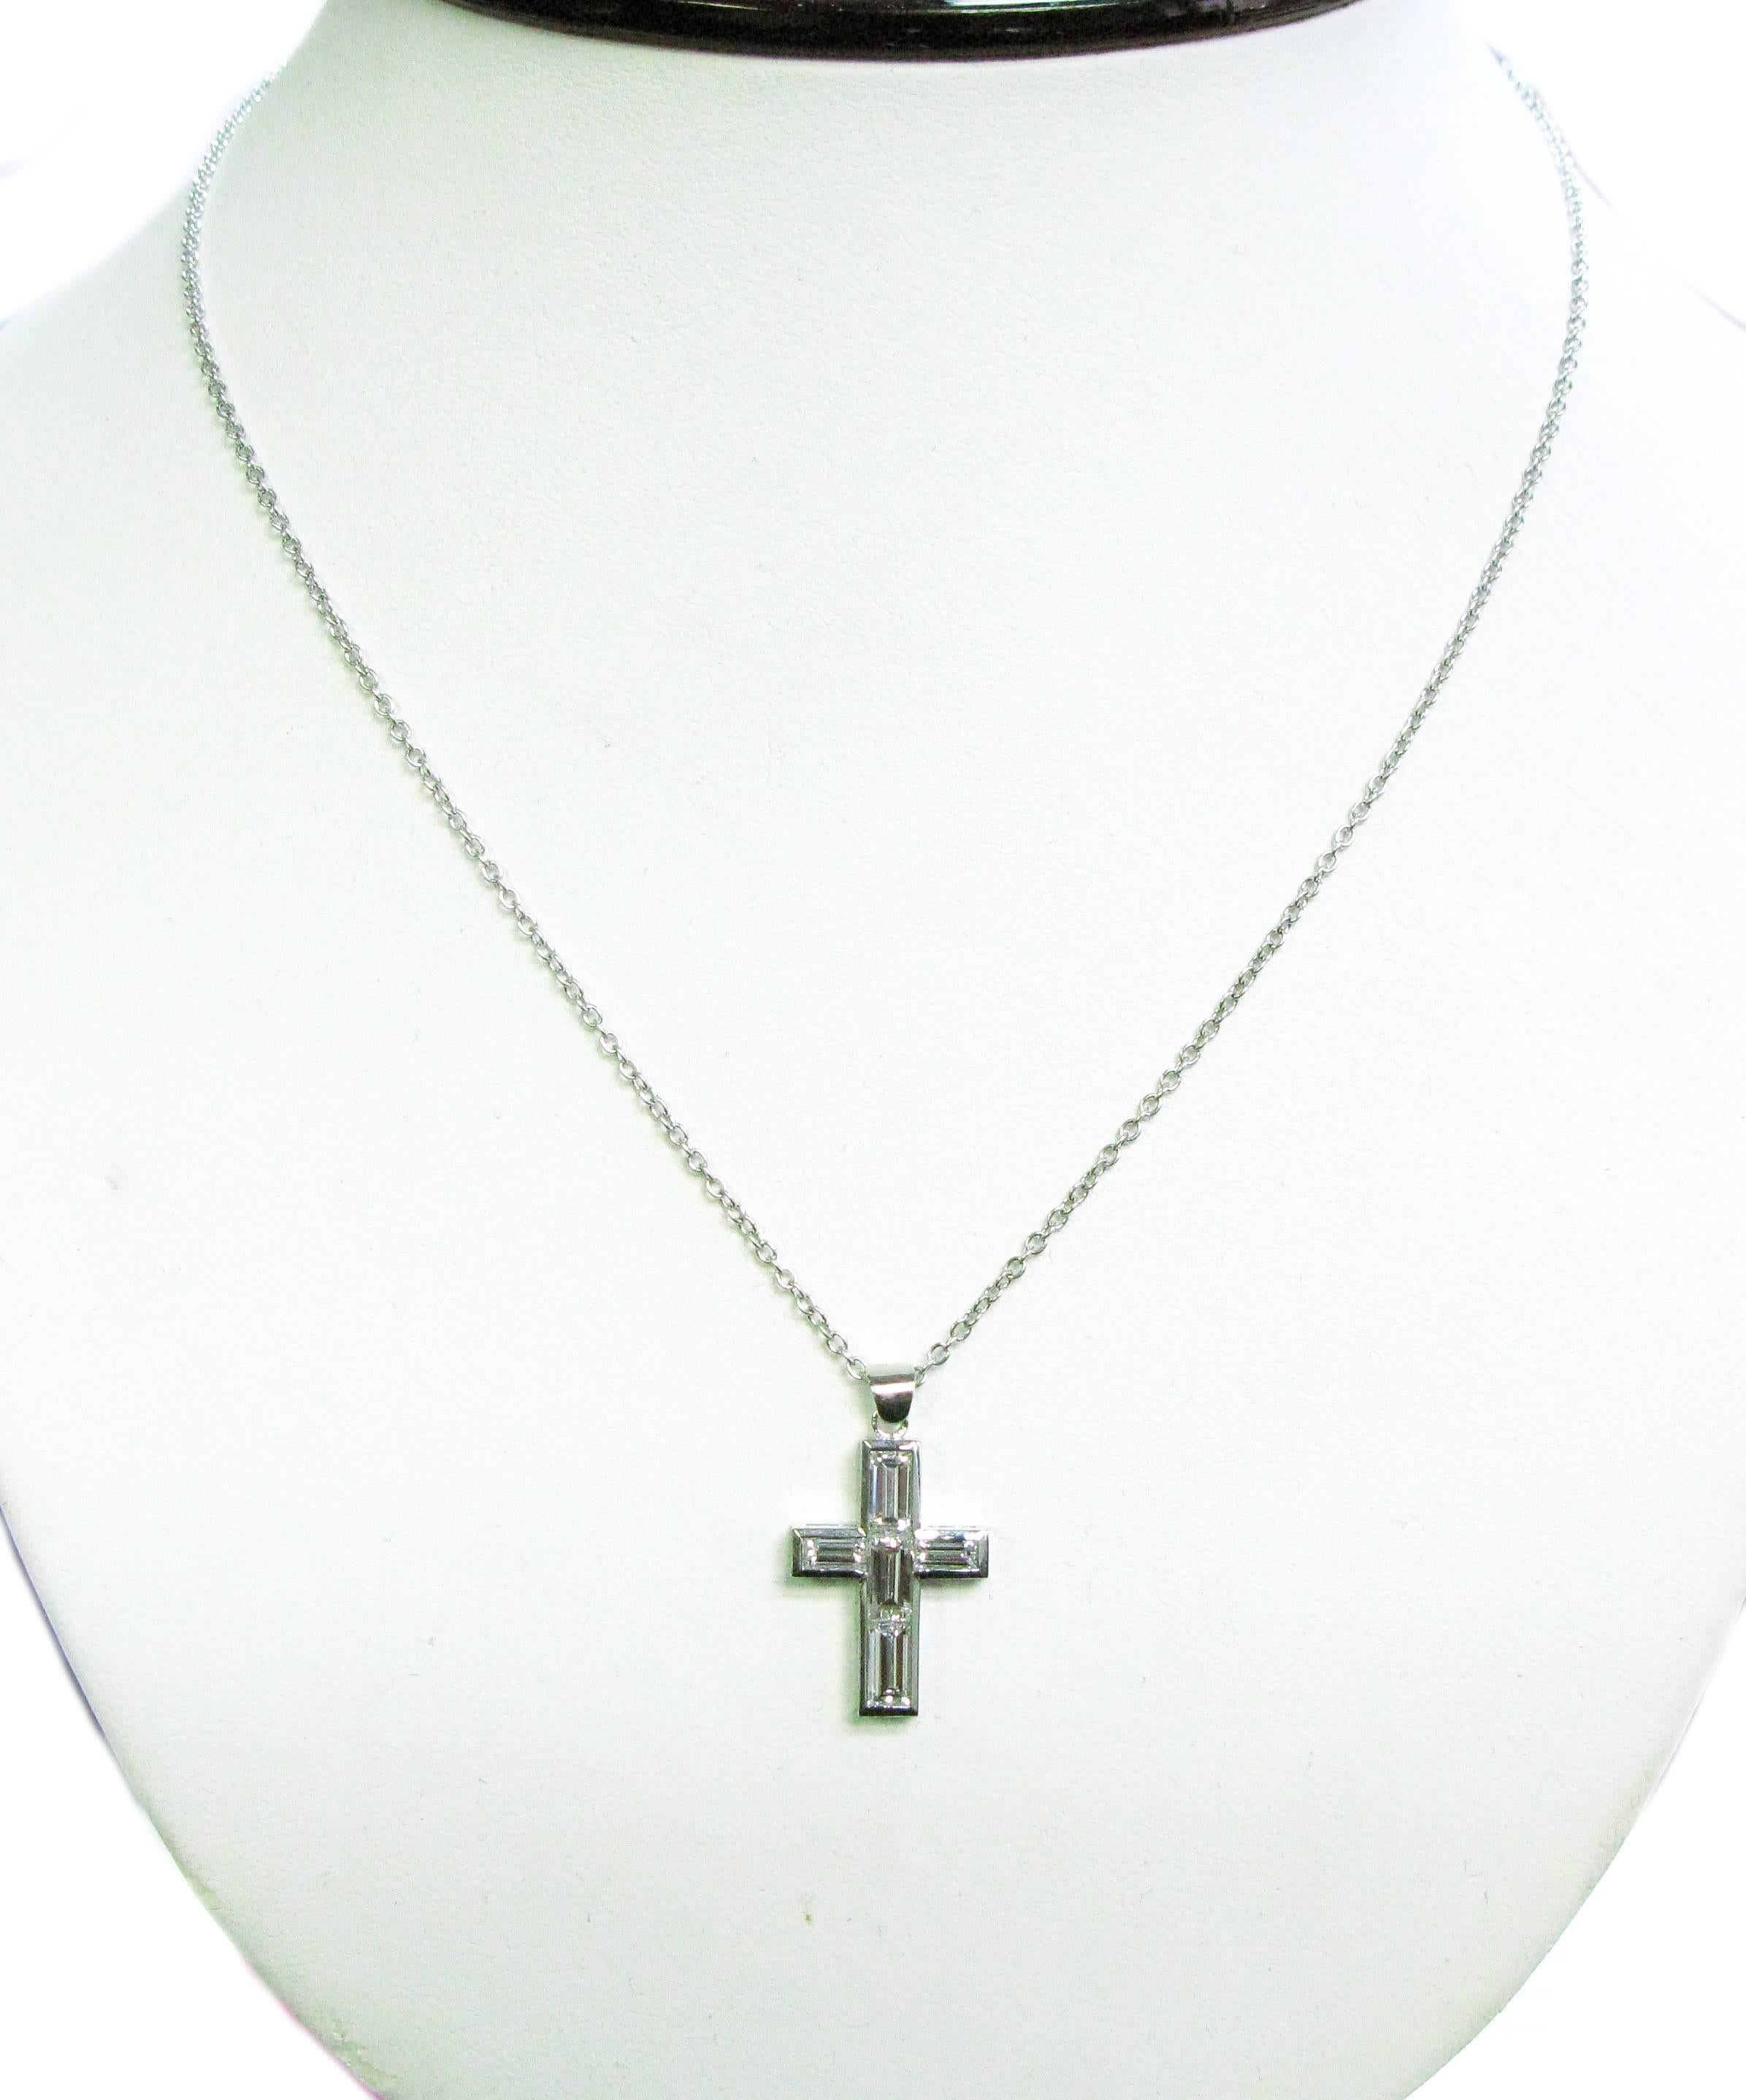 This classic cross pendant features 5 F/G color, VS1 clarity, diamond baguettes totaling 2.06cts. The pendant is set in 18kt white gold and is suspended from an 18